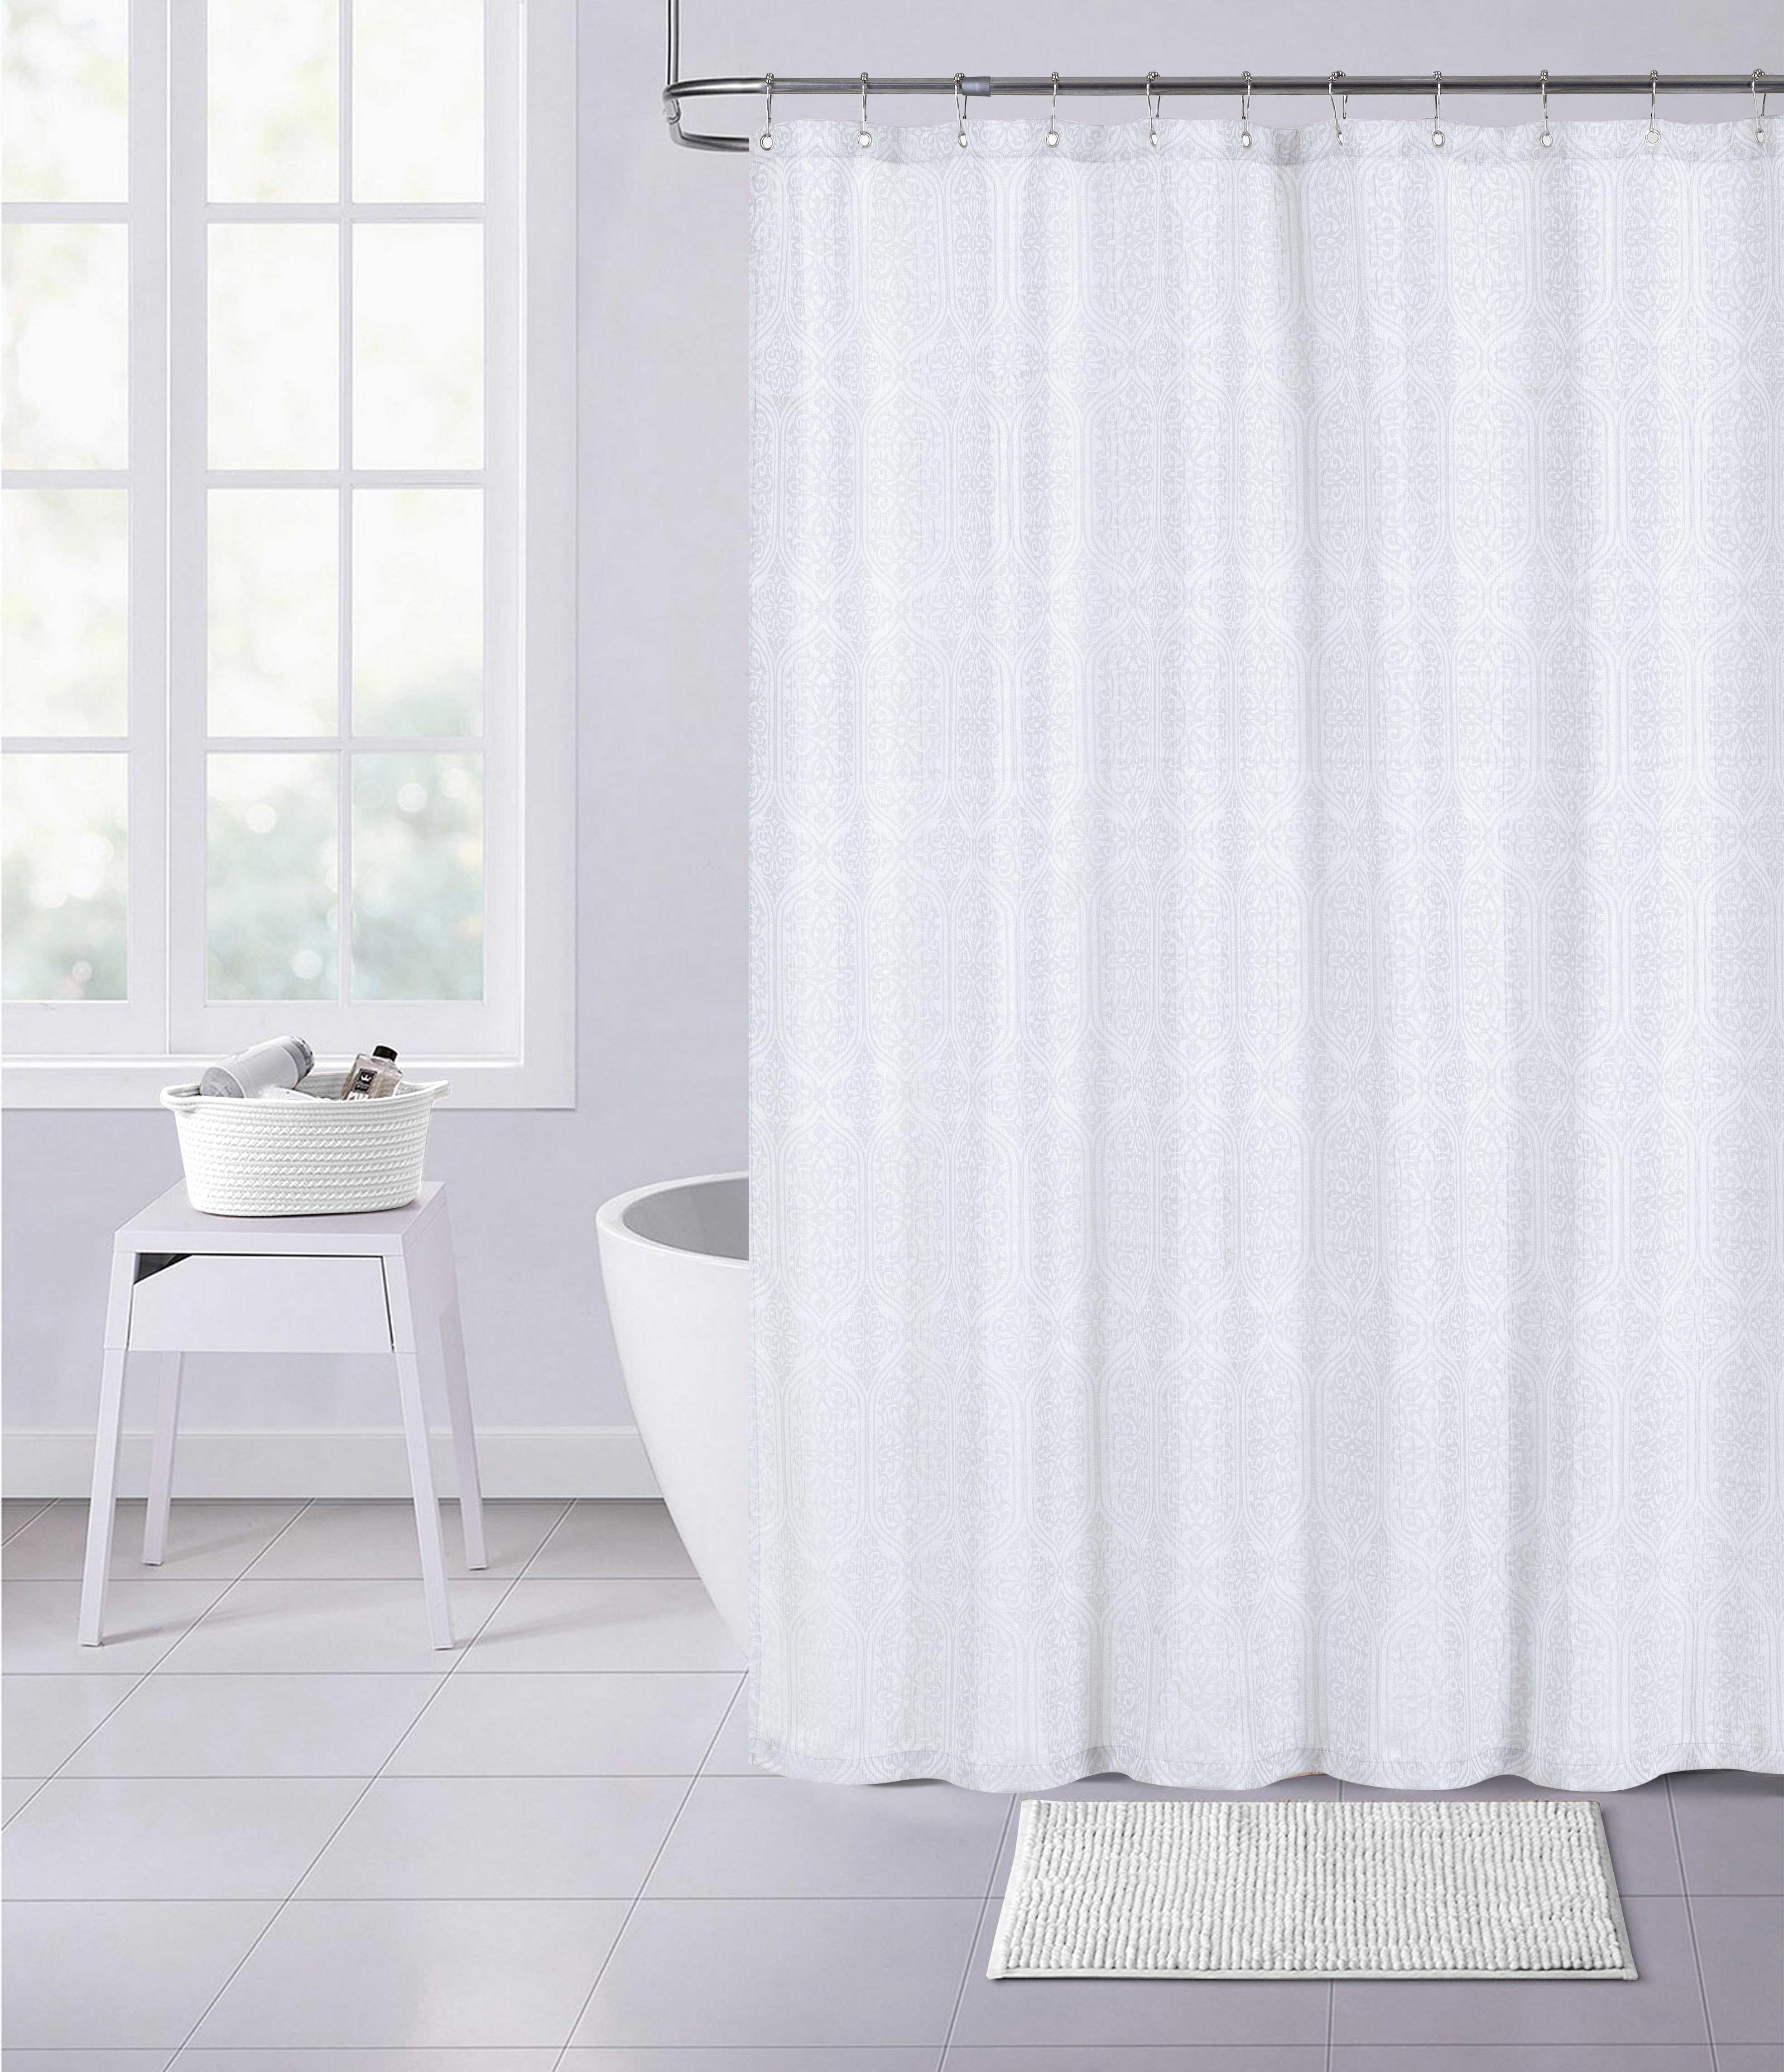 Dainty Home Shirin 3D Embossed Textured Cotton Feel Medallion Designed Fabric Shower Curtain